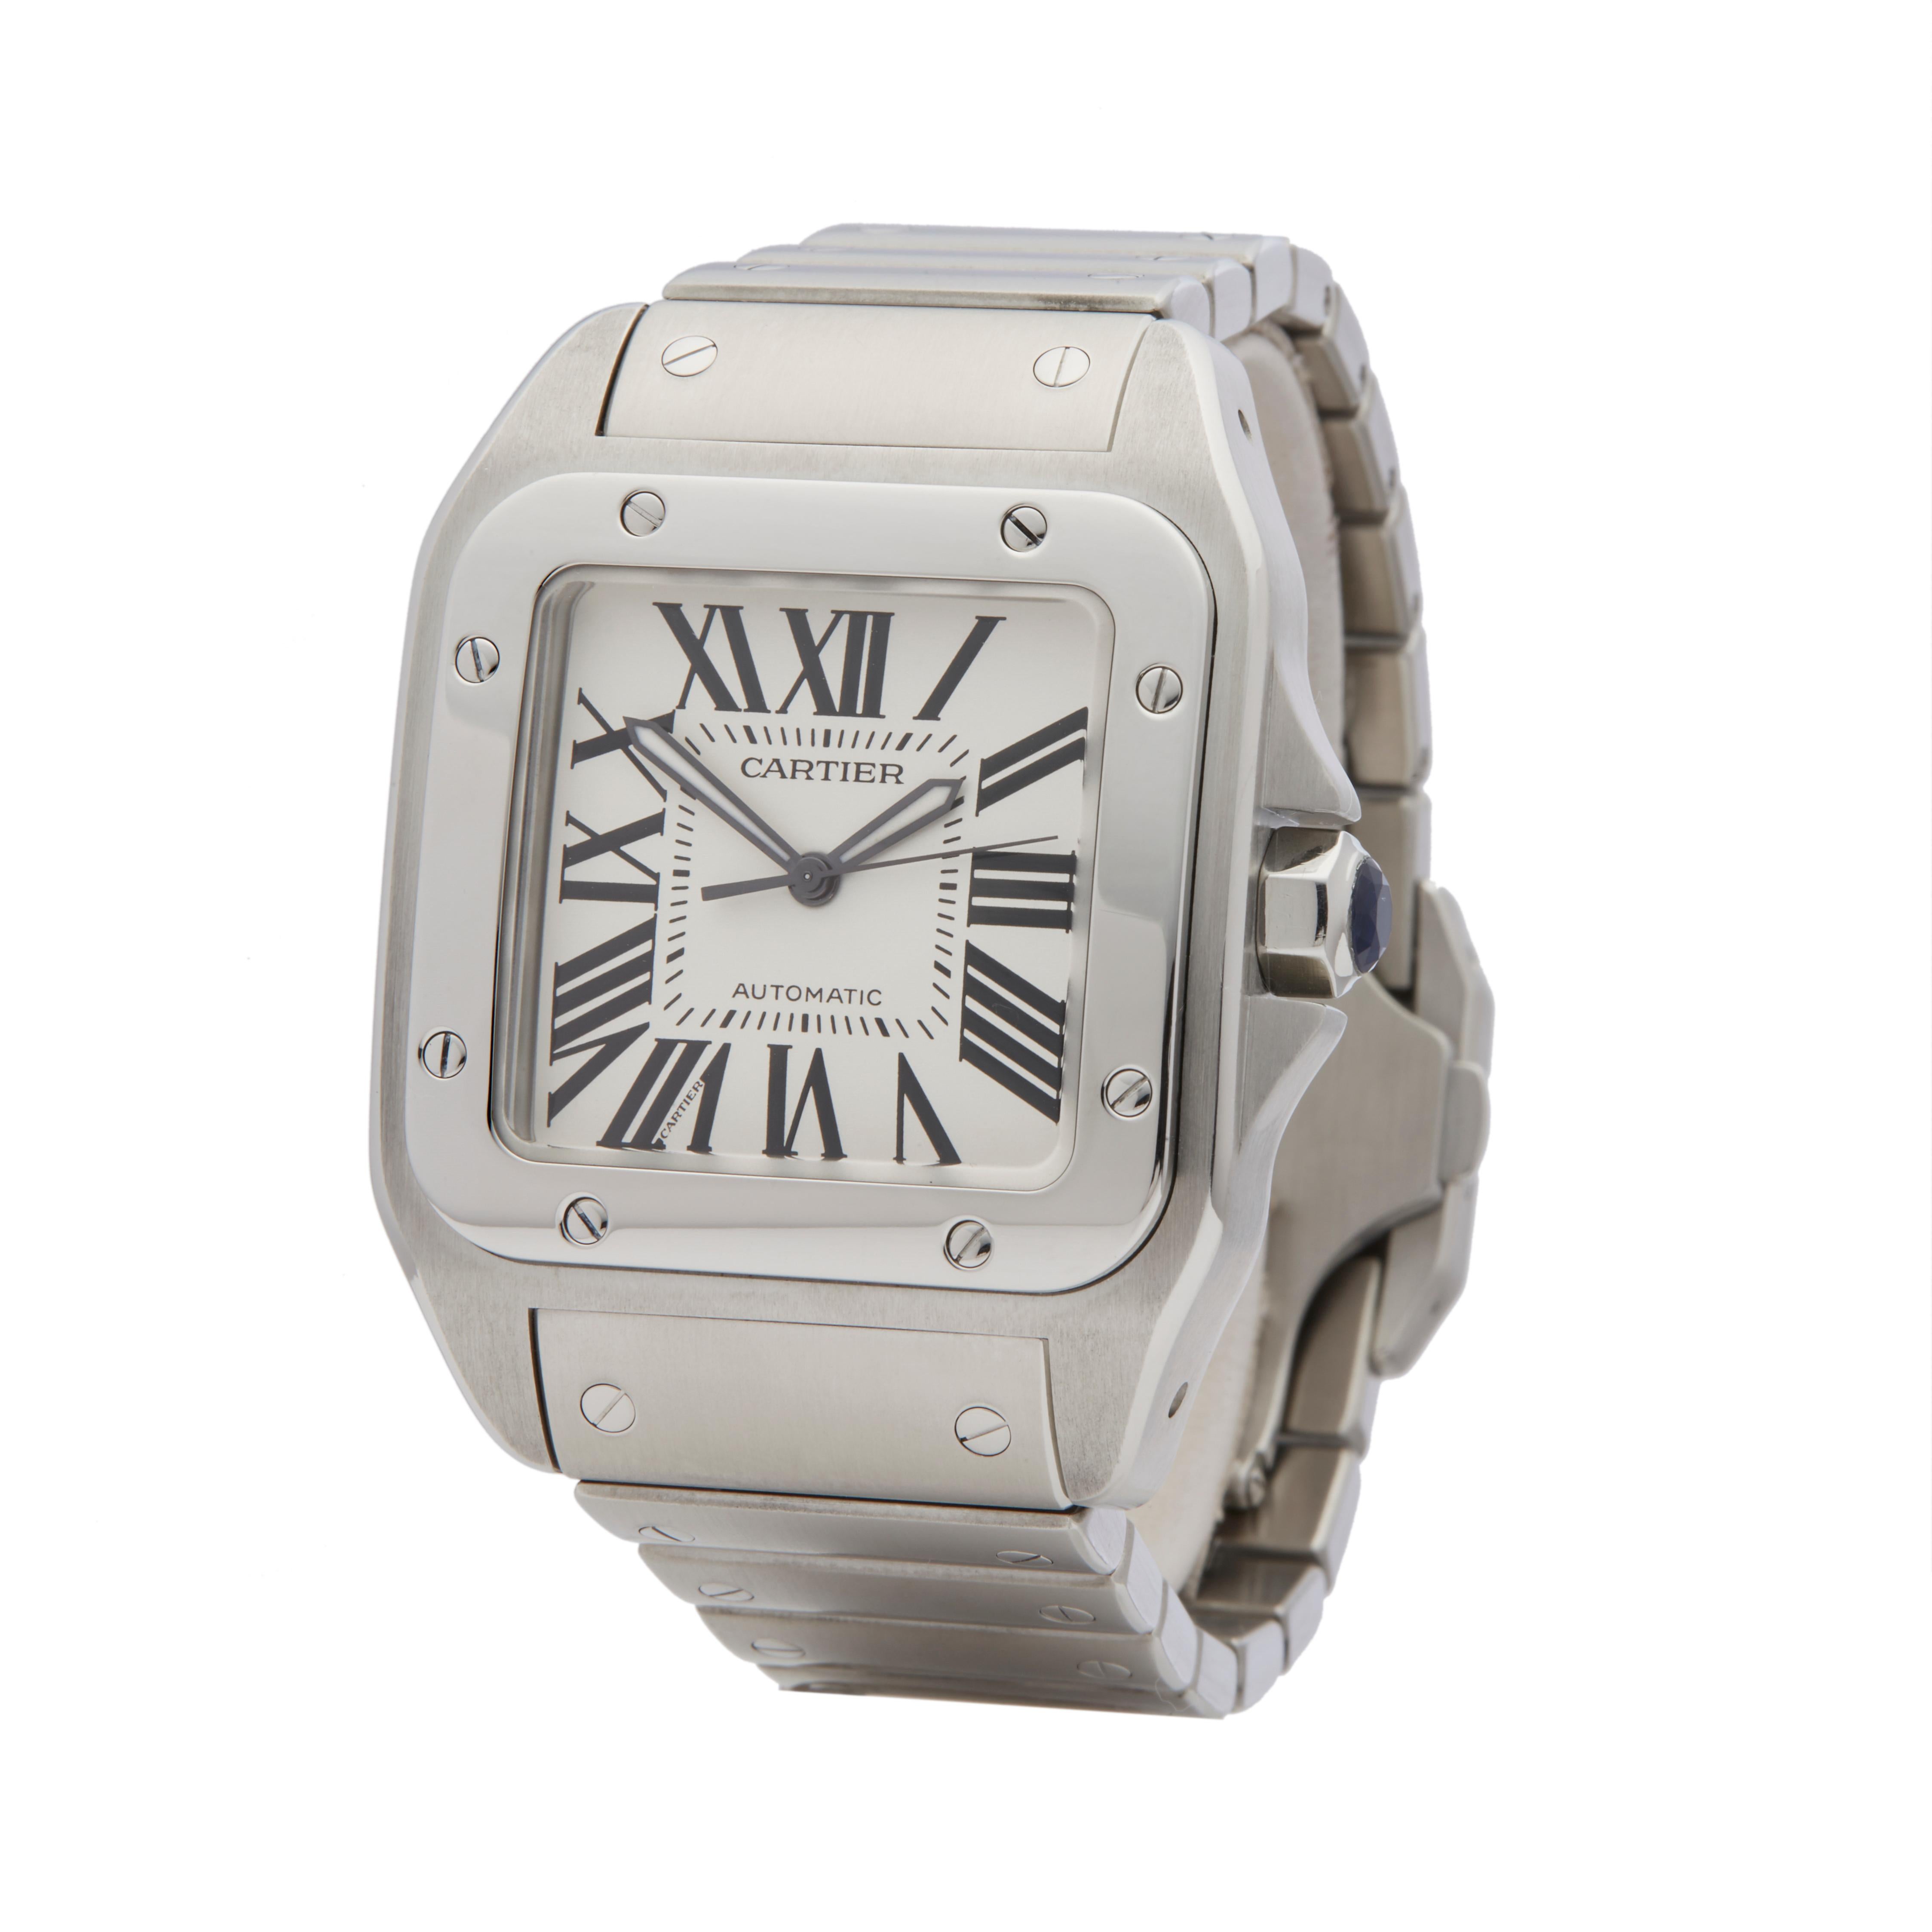 Reference: W5246
Manufacturer: Cartier
Model: Santos 100
Model Reference: 2858
Age: 30th August 2008
Gender: Men's
Box and Papers: Xupes Presentation Pouch and Guarantee
Dial: White Roman
Glass: Sapphire Crystal
Movement: Automatic
Water Resistance: